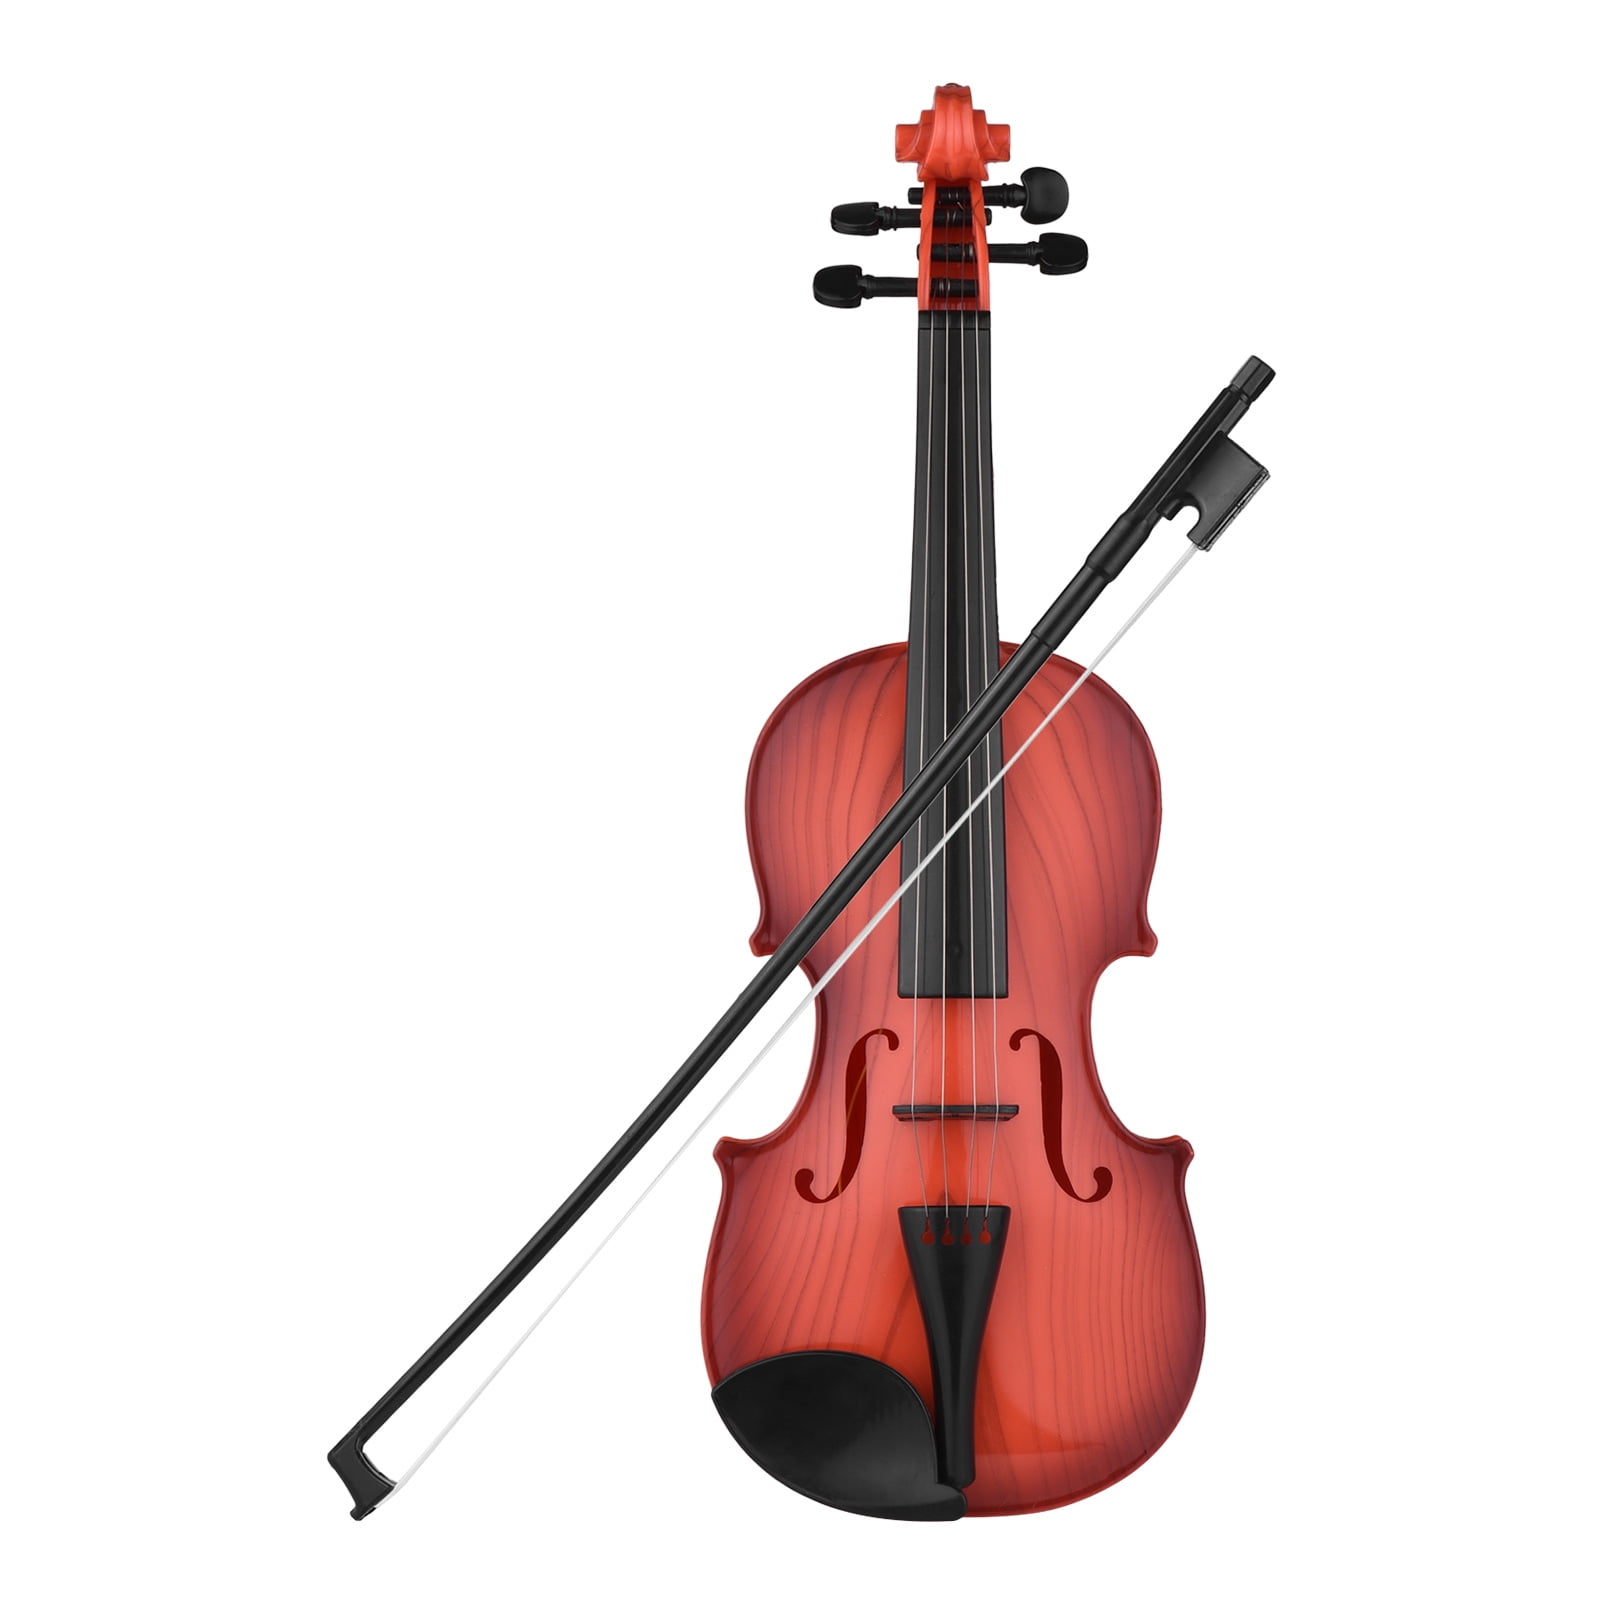 HMANE Electric Violin Toys Musical Instruments Toy with Light and Sound for Kids Boys and Girls Pink Best Gifts for Children